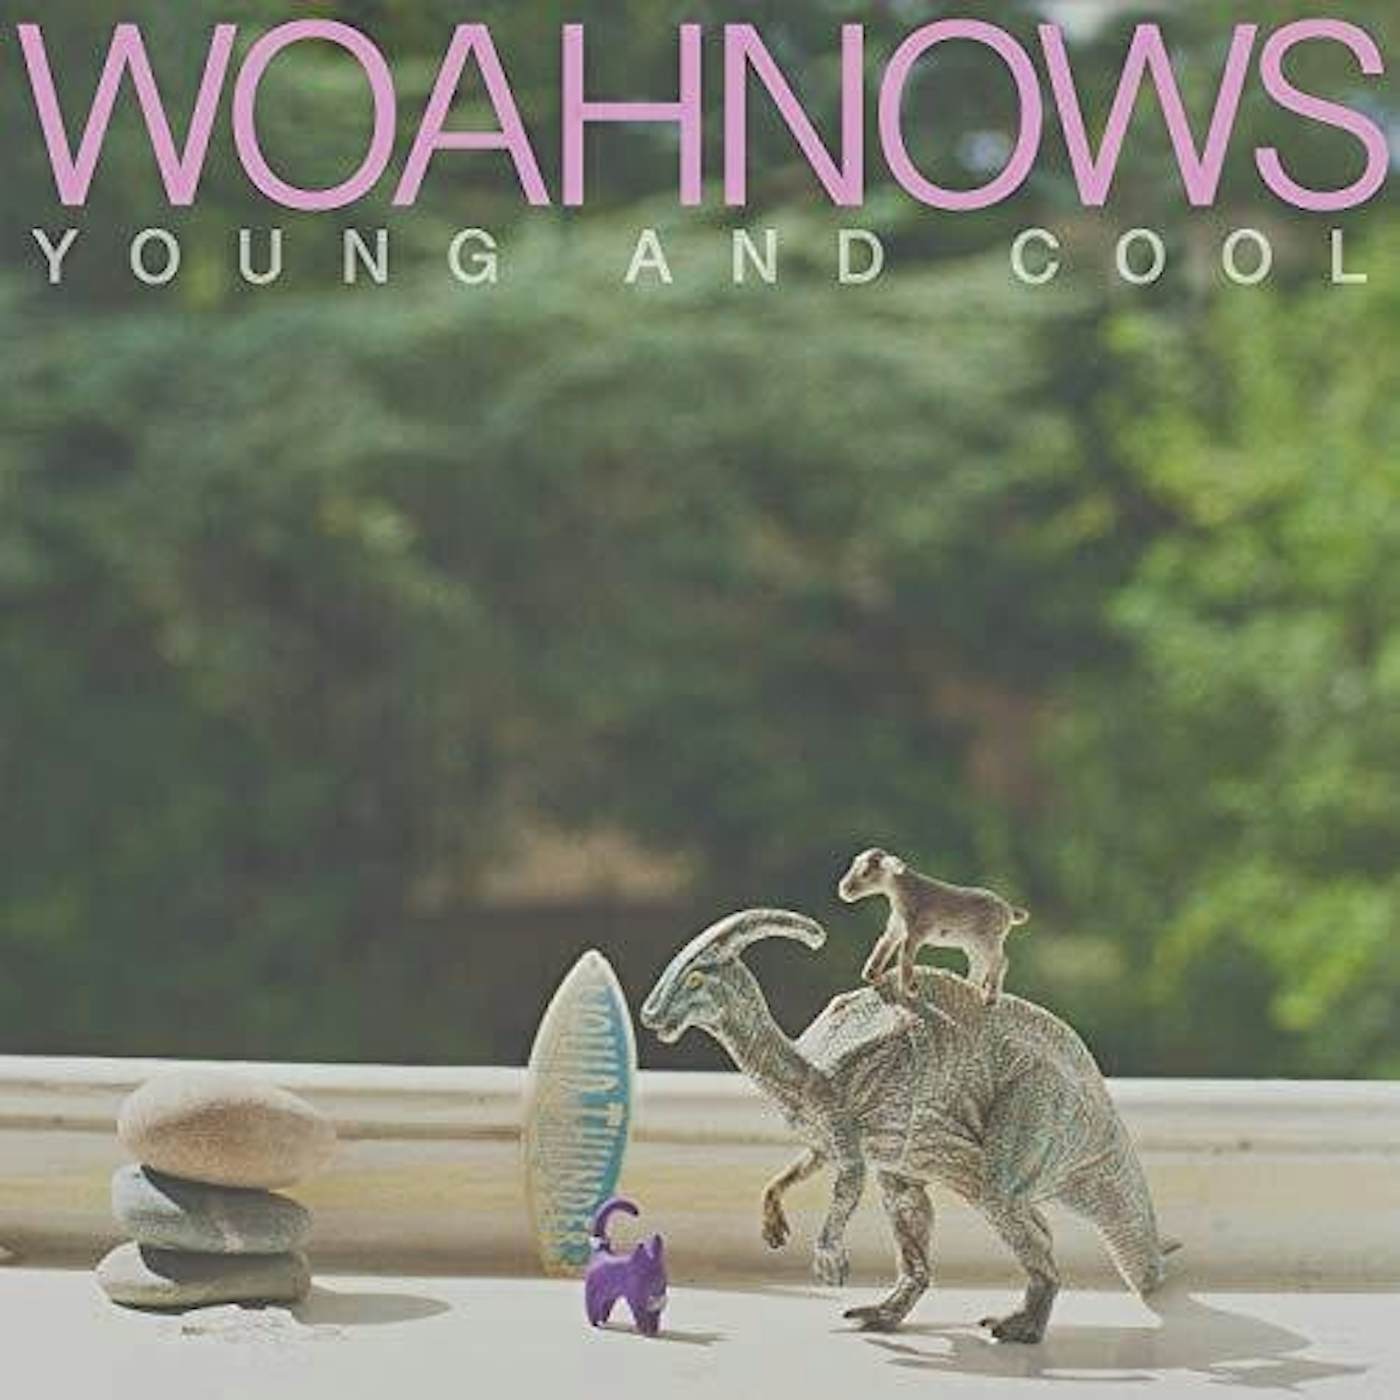 Woahnows YOUNG & COOL CD